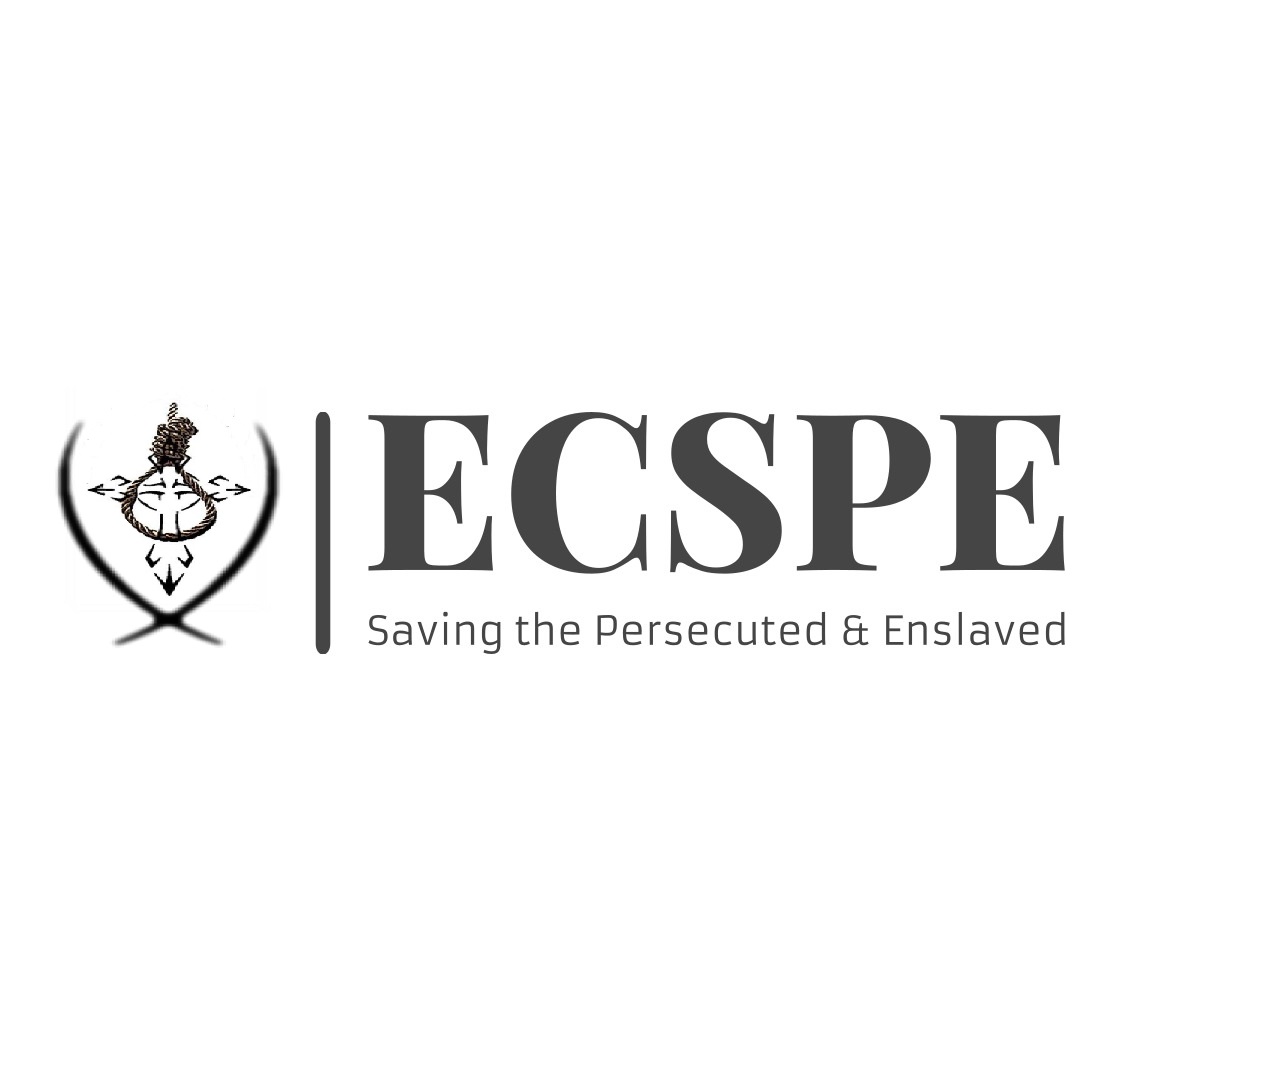 Emergency Committee to Save the Persecuted and Enslaved logo